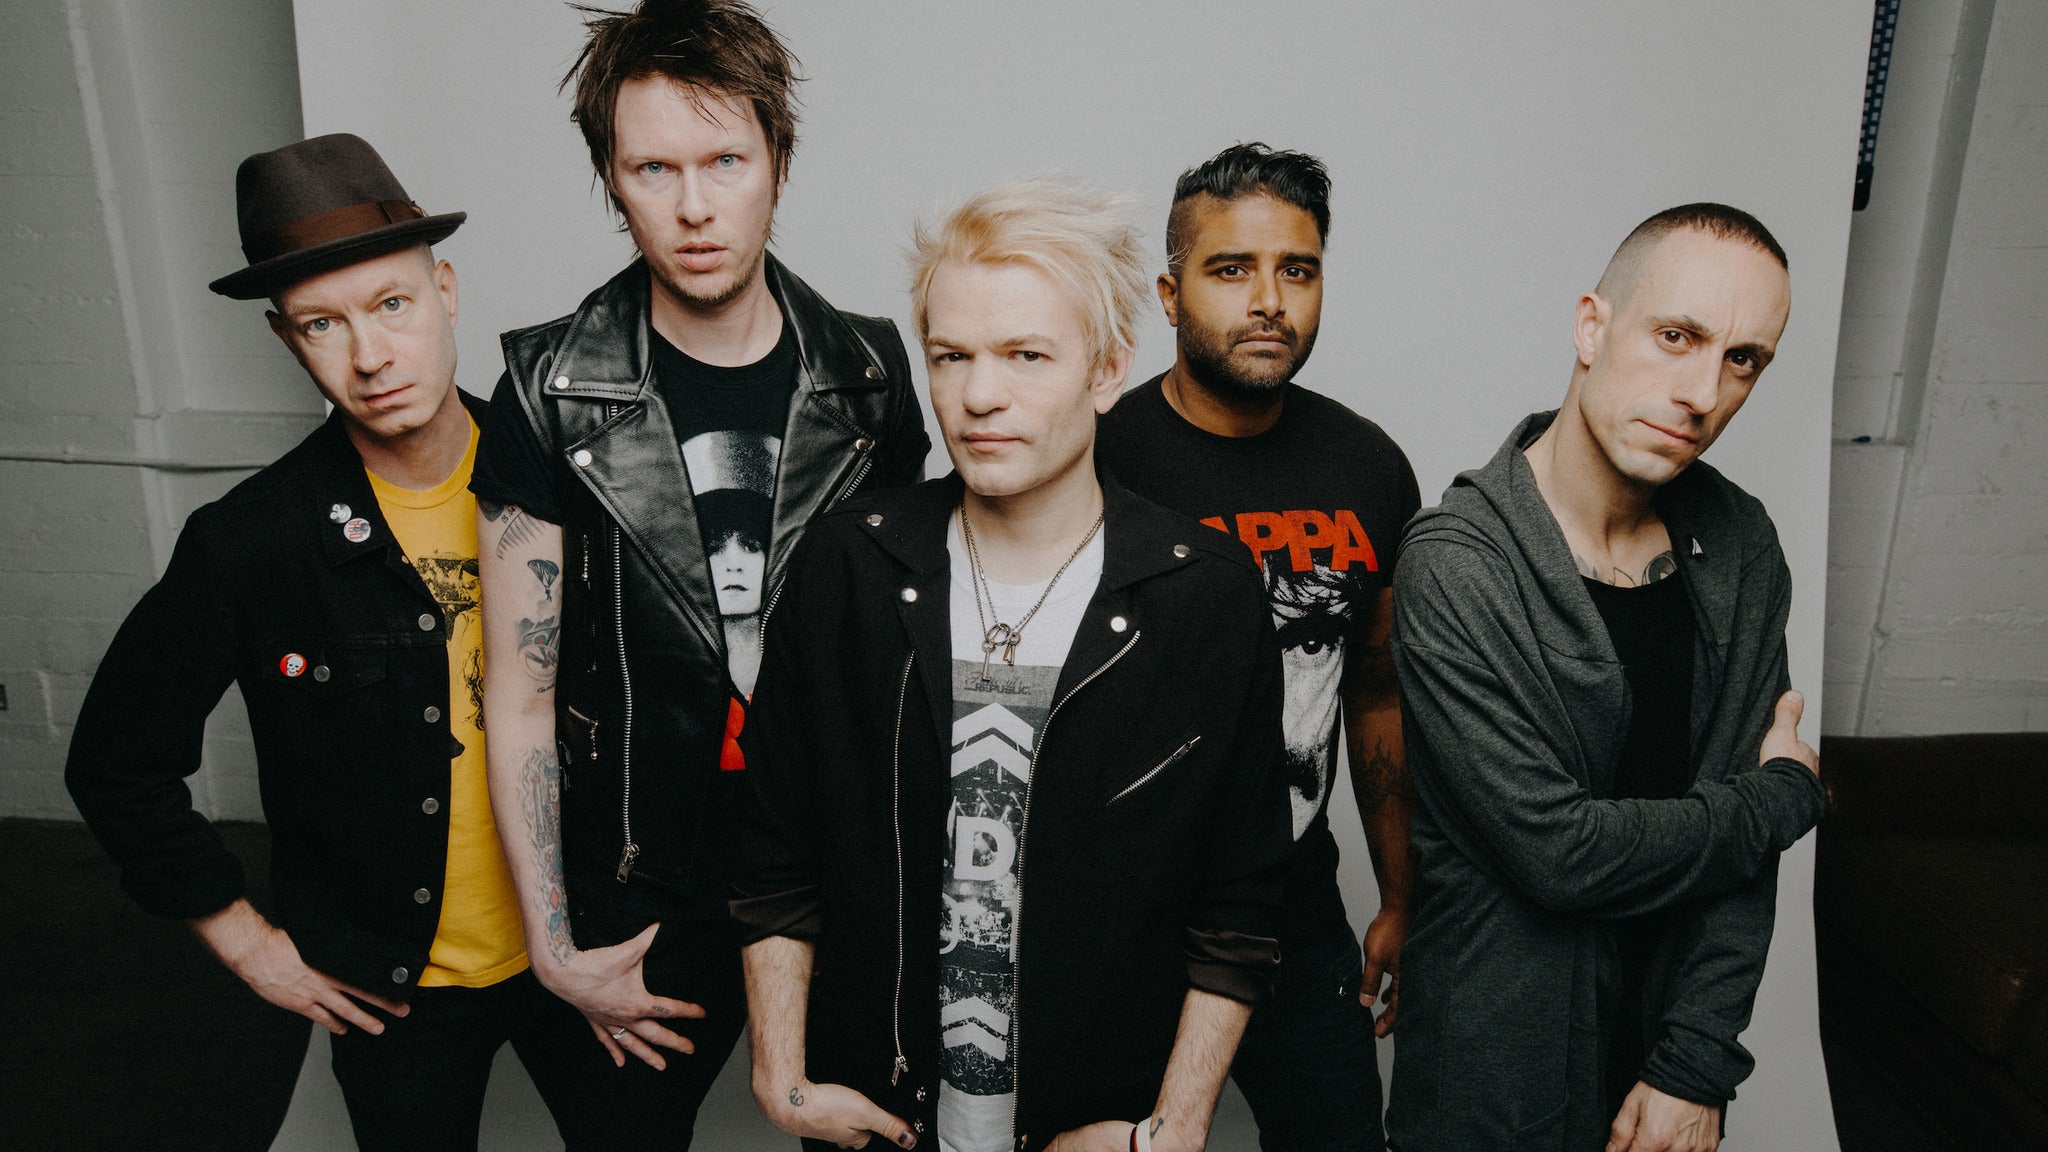 Sum 41 & Simple Plan: The Blame Canada Tour at The Masonic